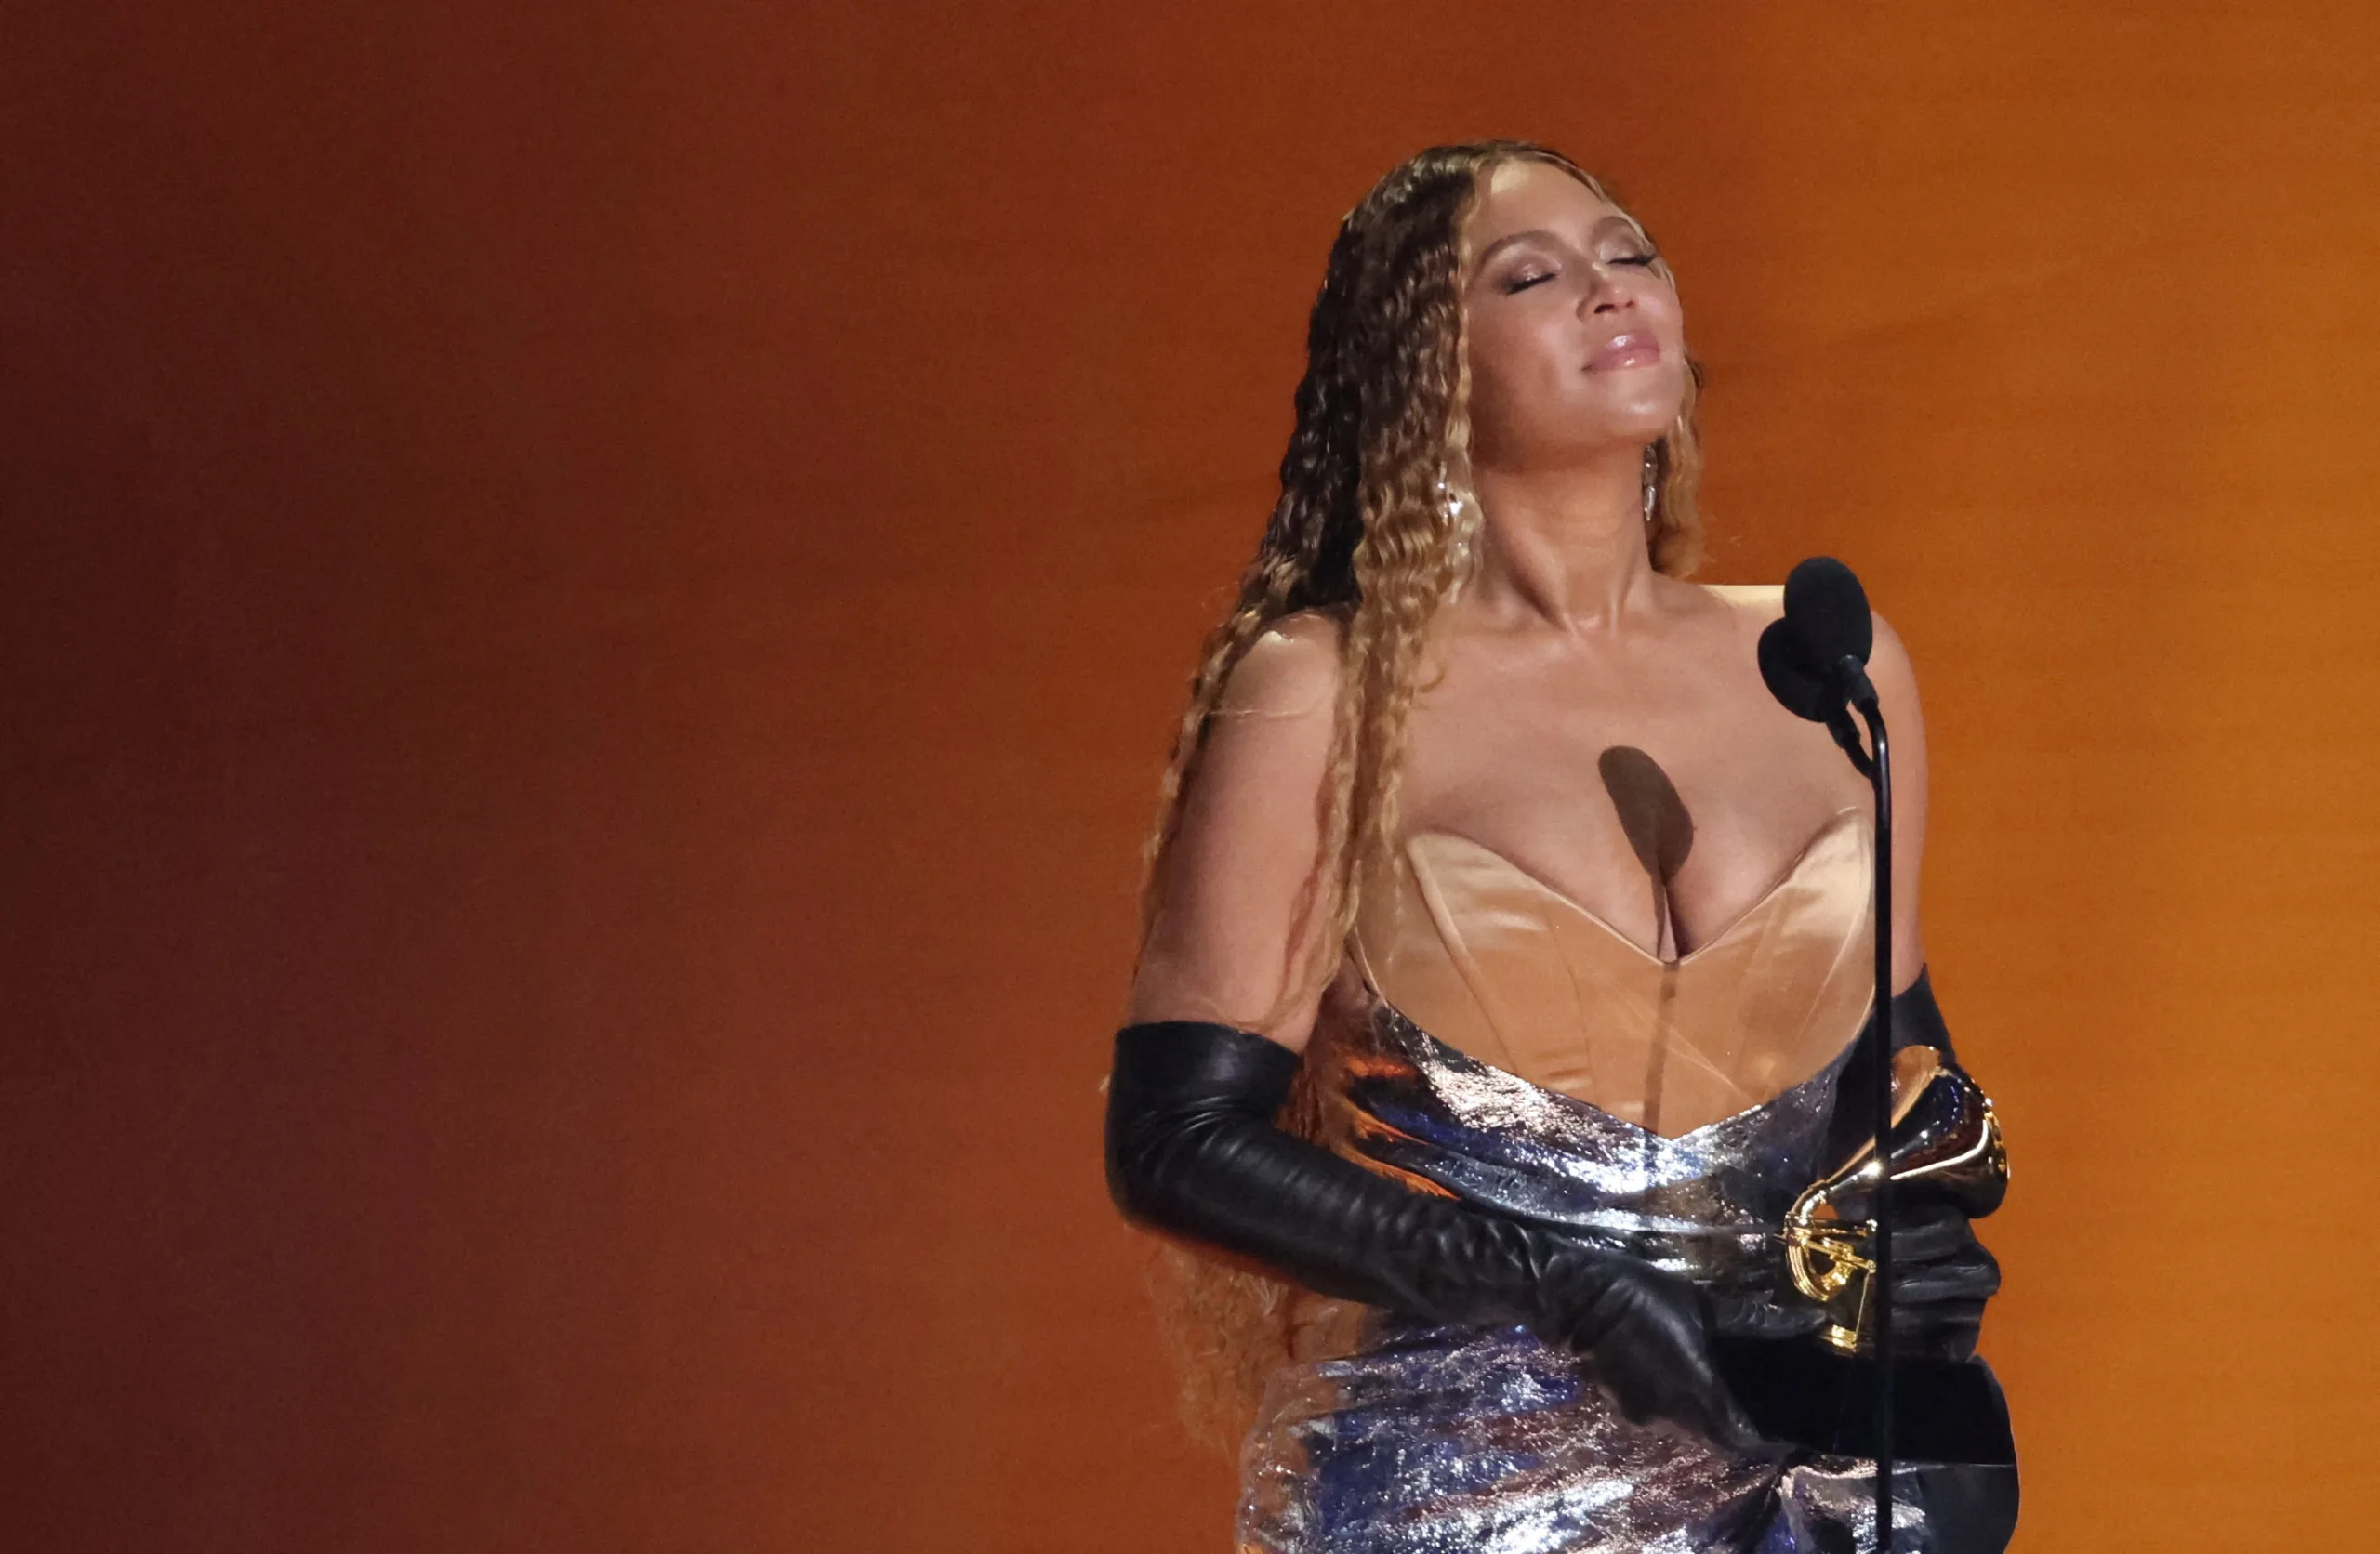 Beyoncé holding a microphone with fans cheering in the background.